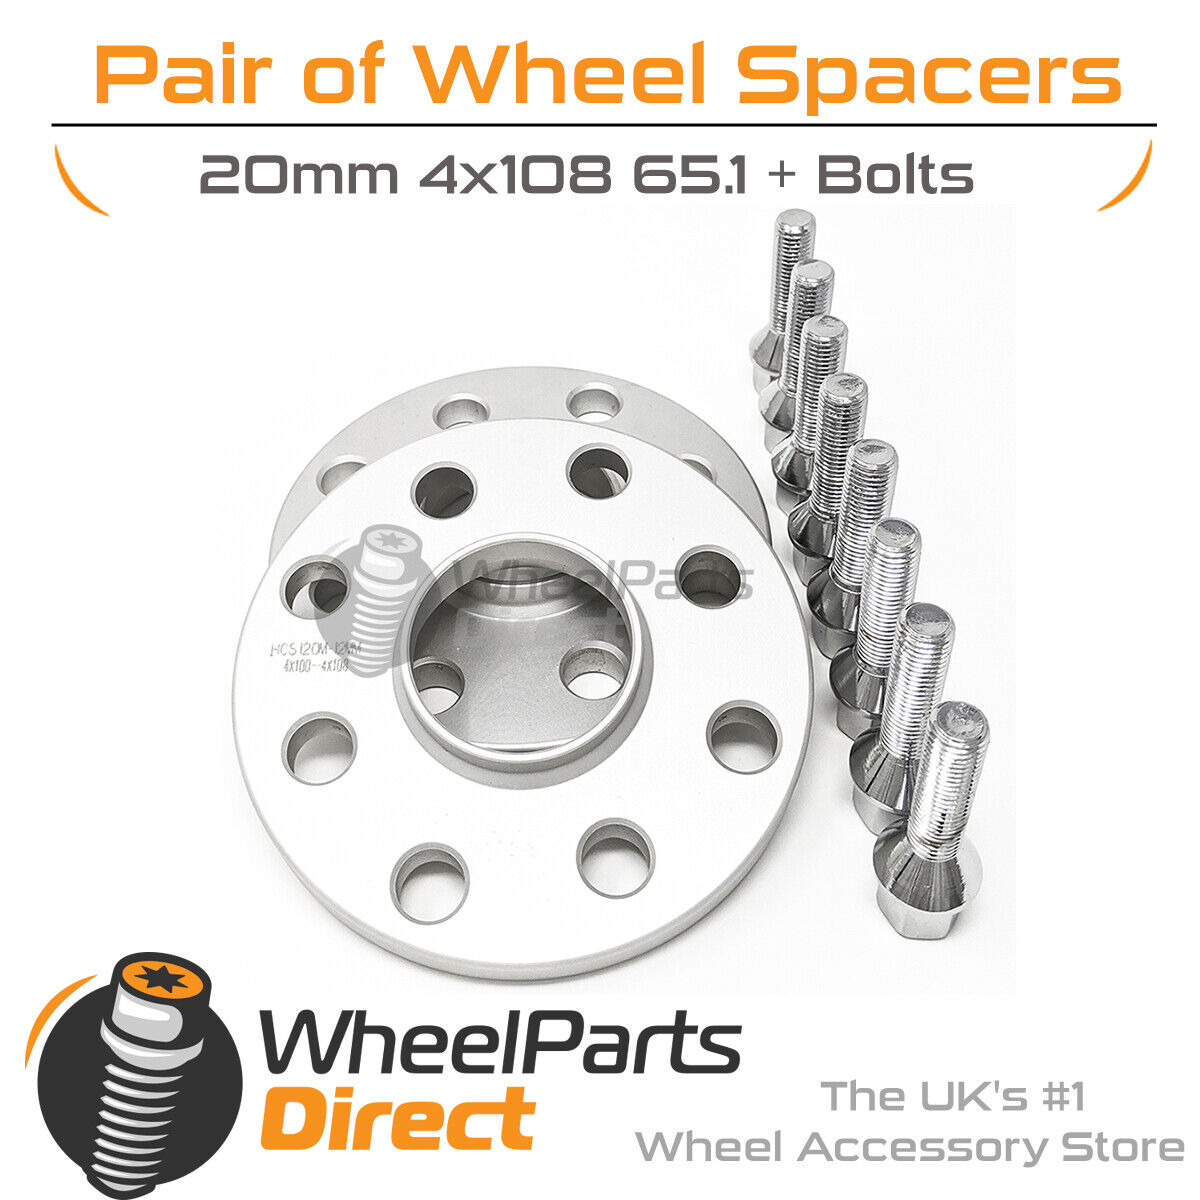 Wheel Spacers 20mm (2) Spacer Kit 4x108 65.1 +Bolts For Peugeot 206 98-10